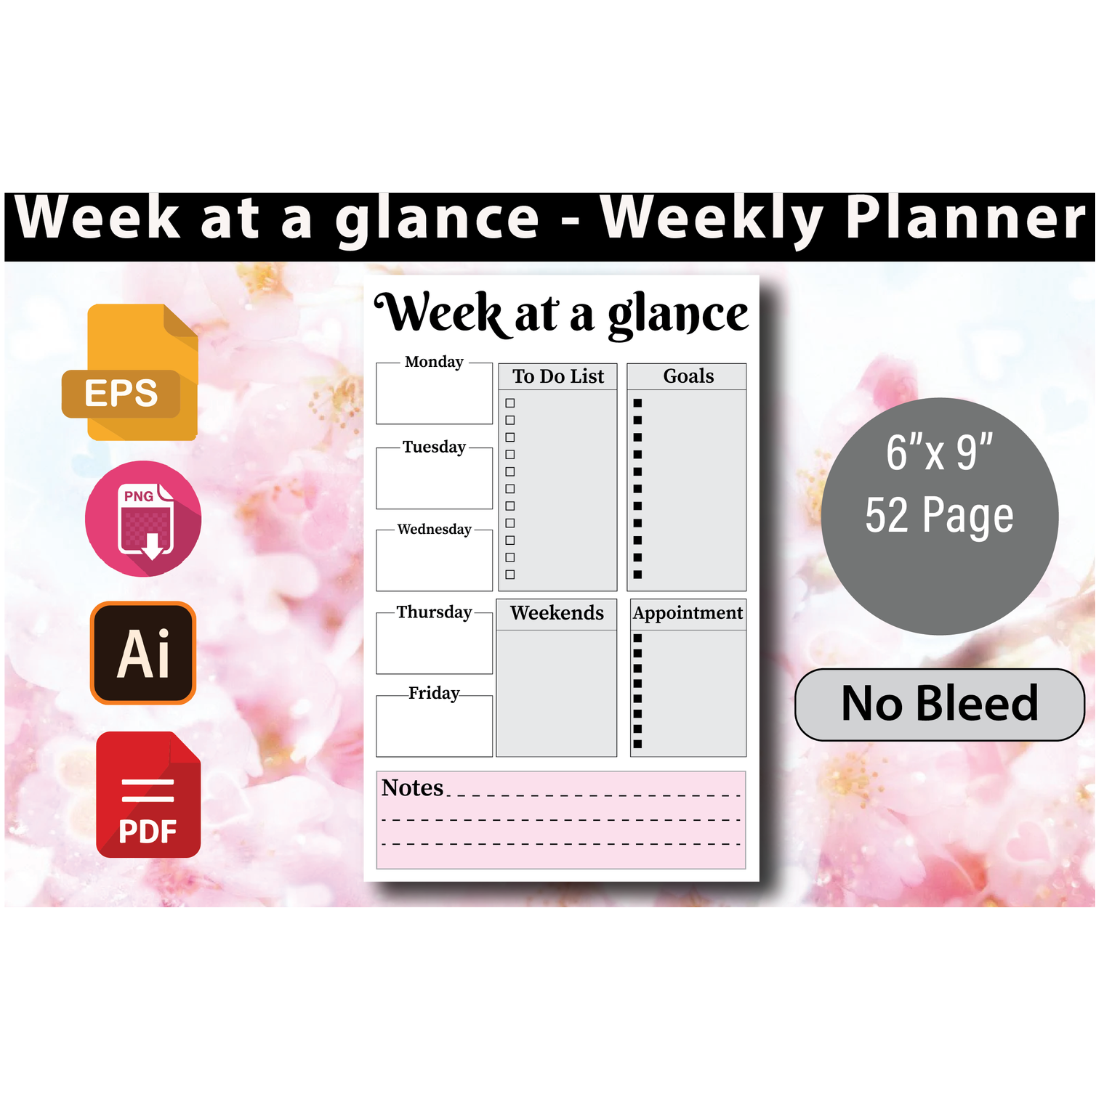 Weekly Planner - Kdp Interior cover image.